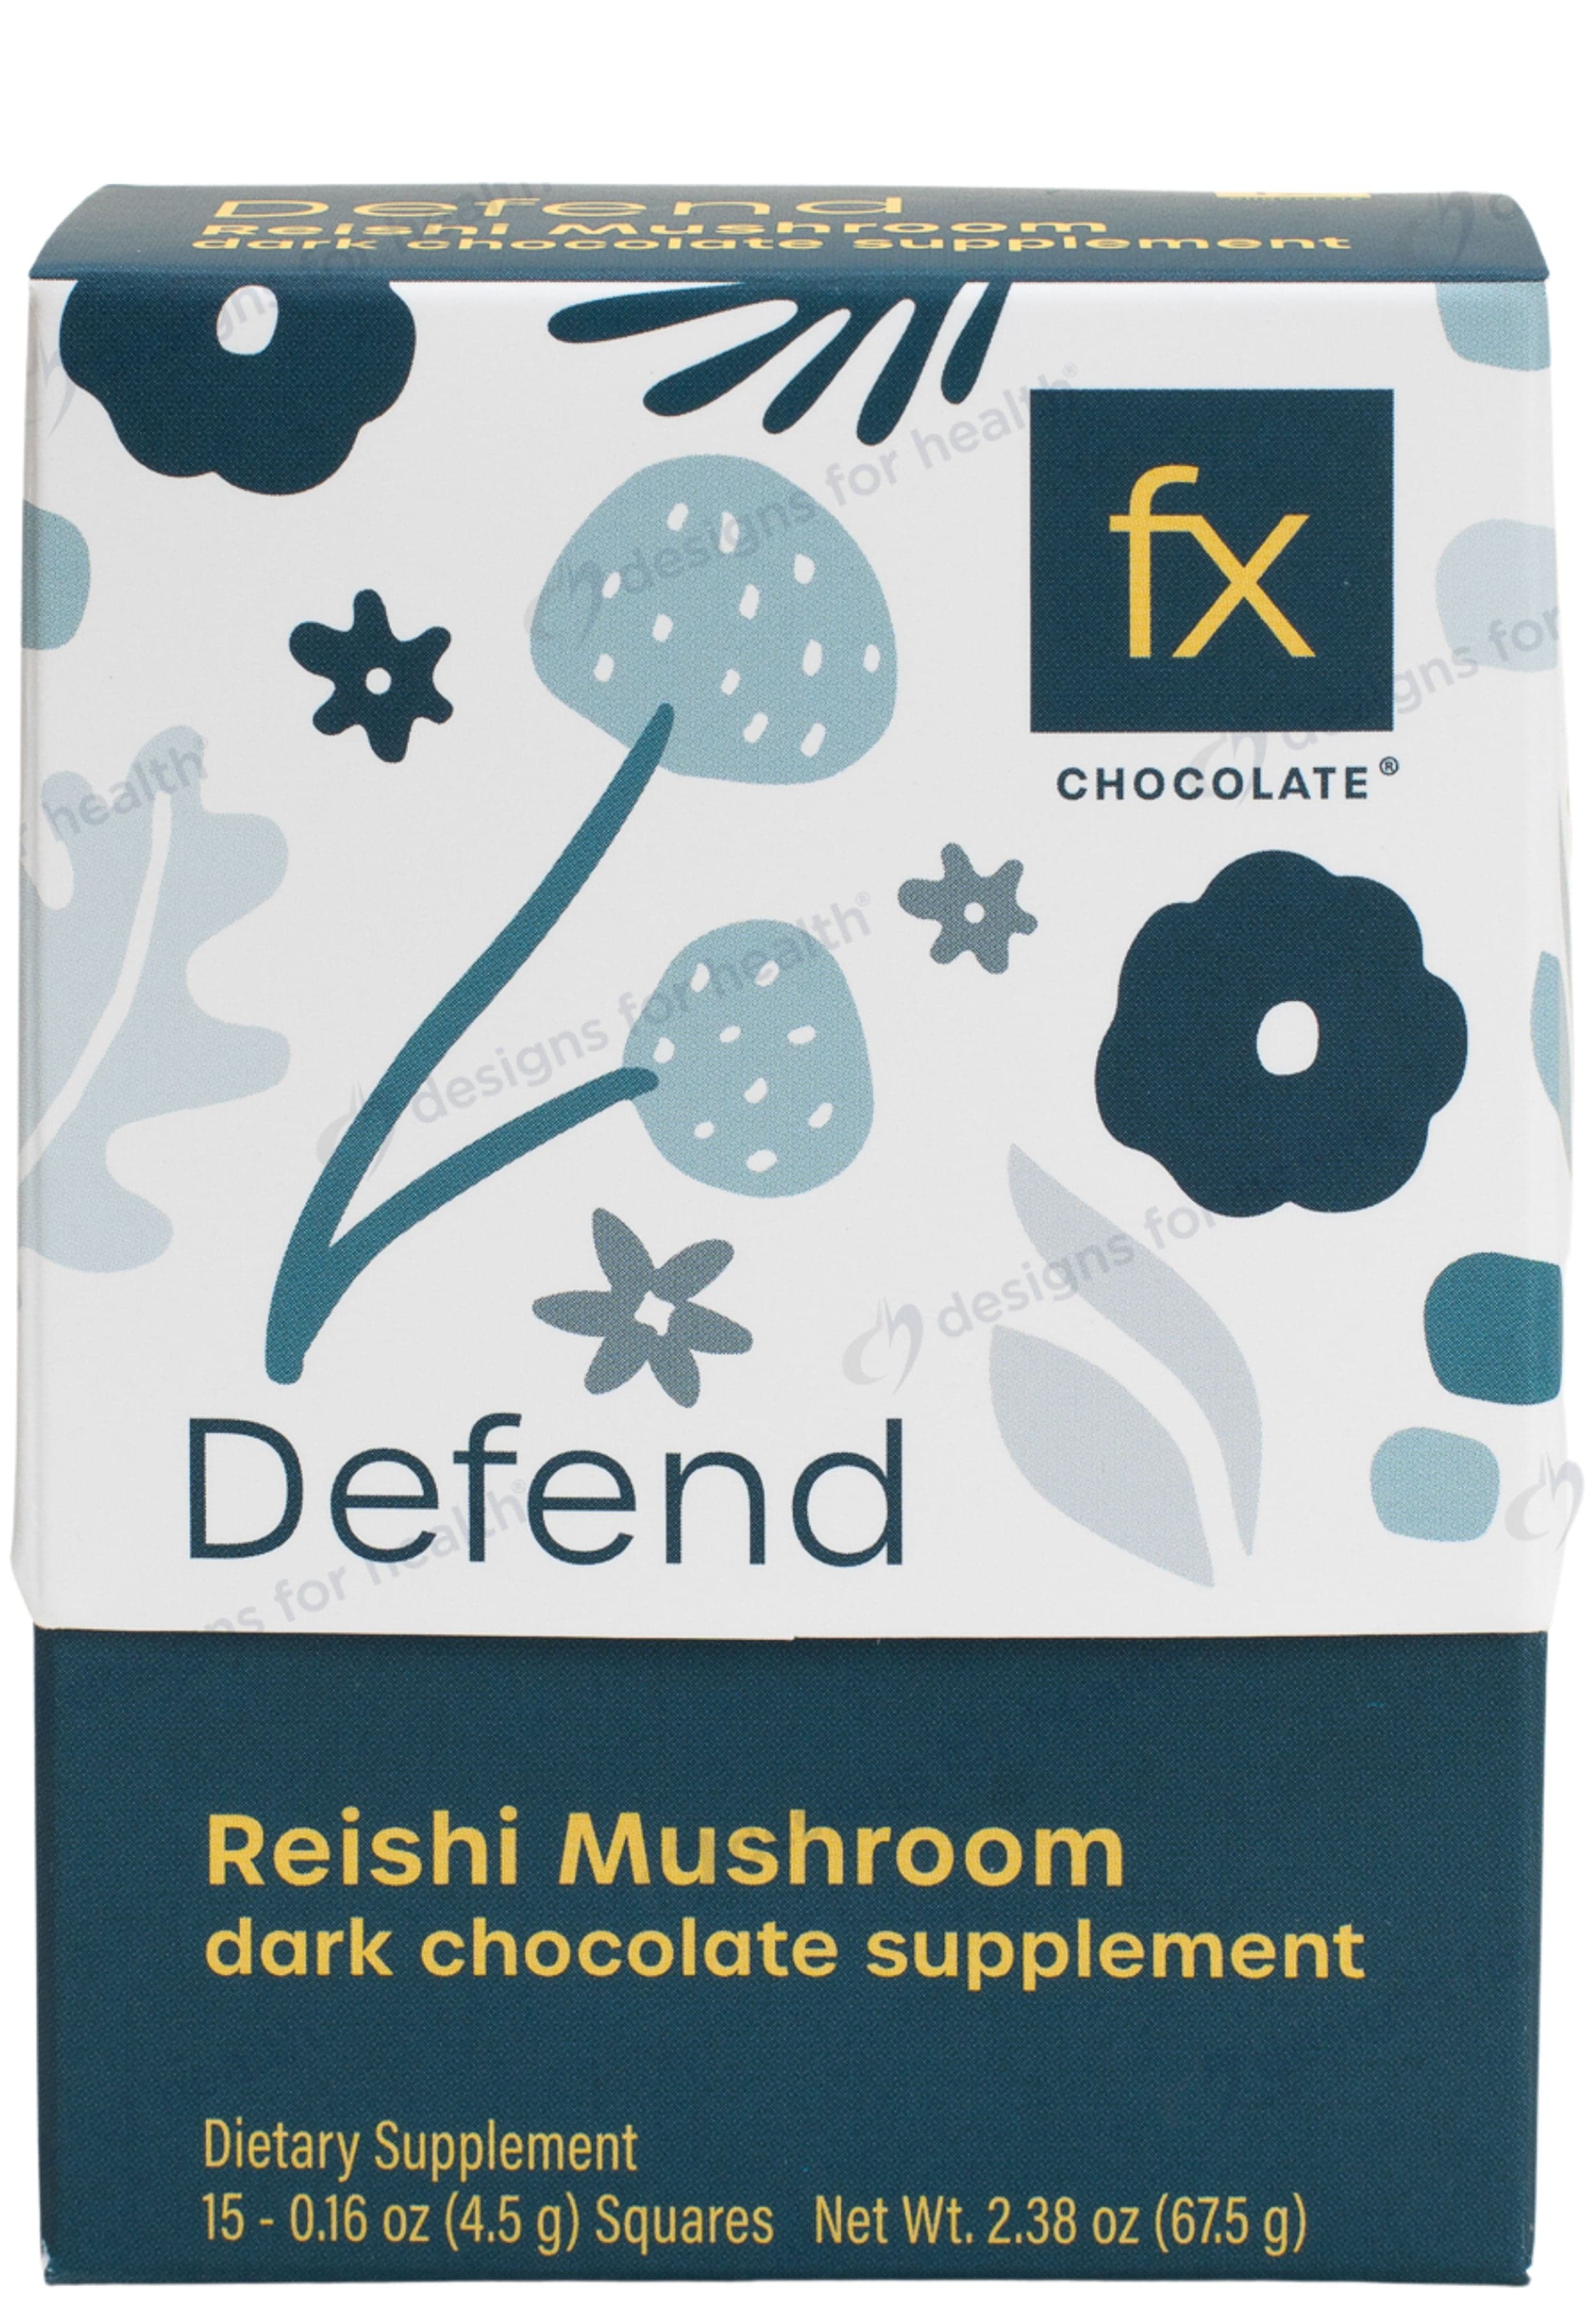 Designs for Health Fx Chocolate Defend